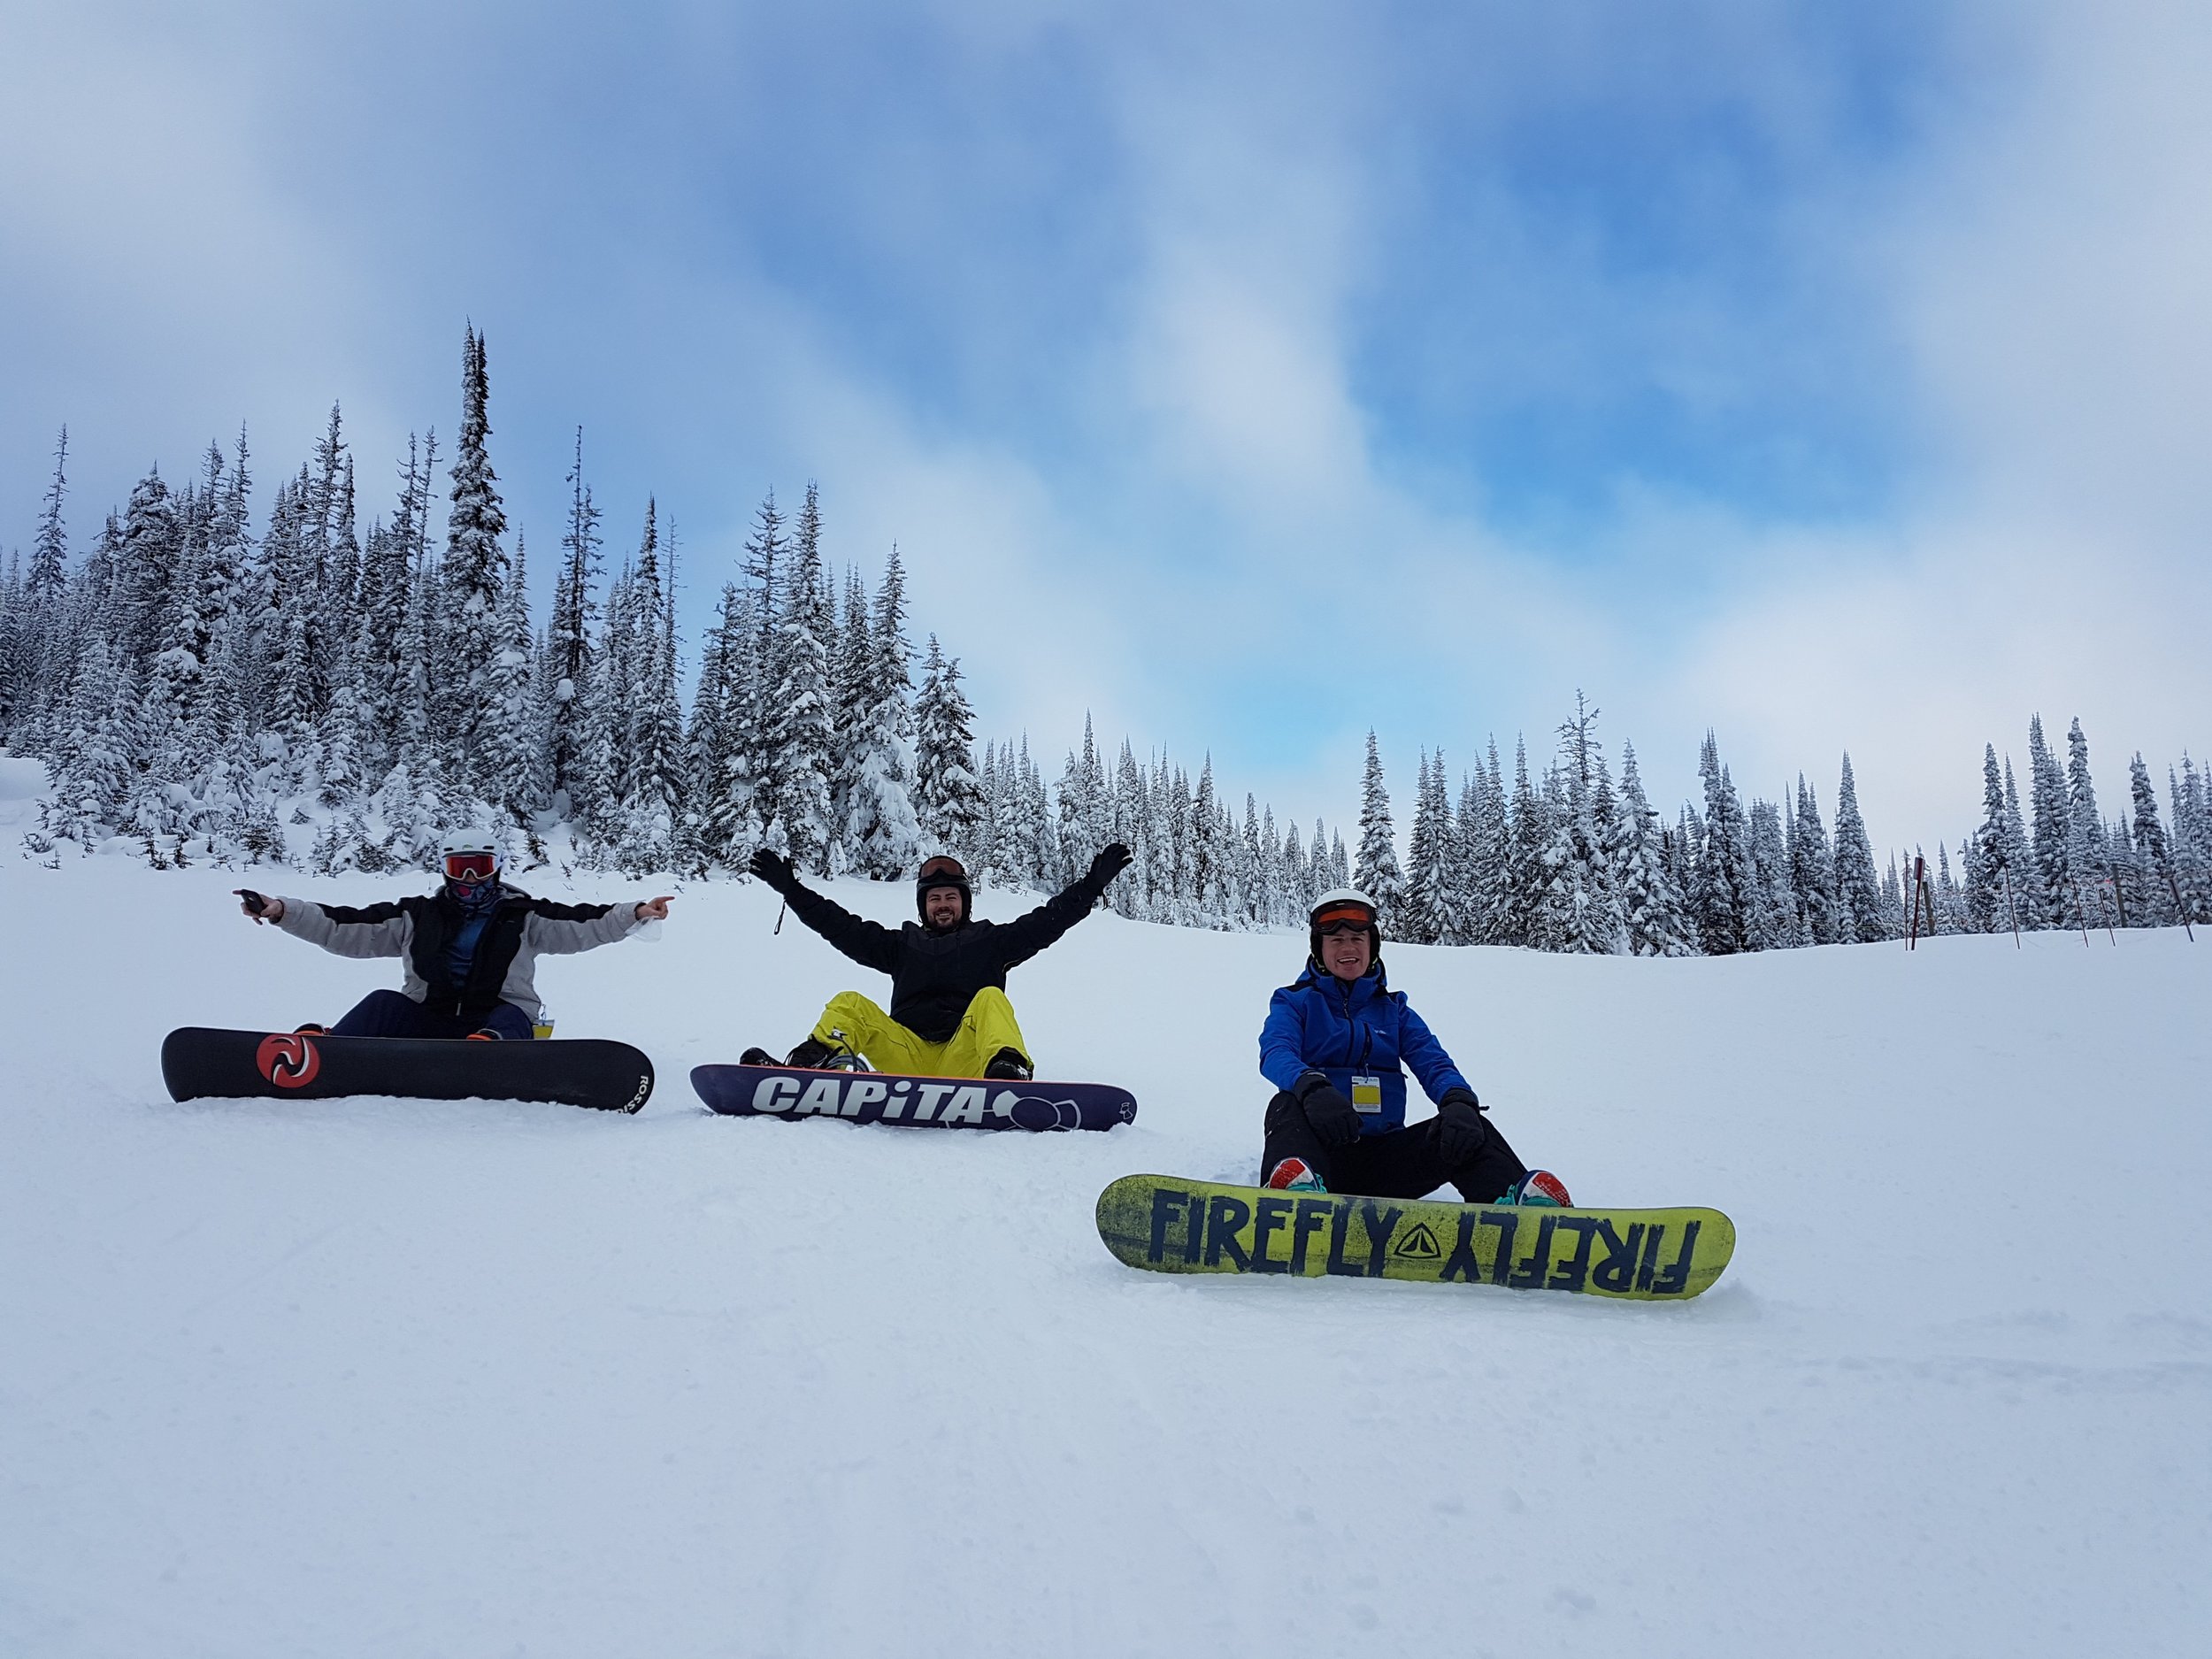 Three snowboarders enjoying their day tour in Vancouver